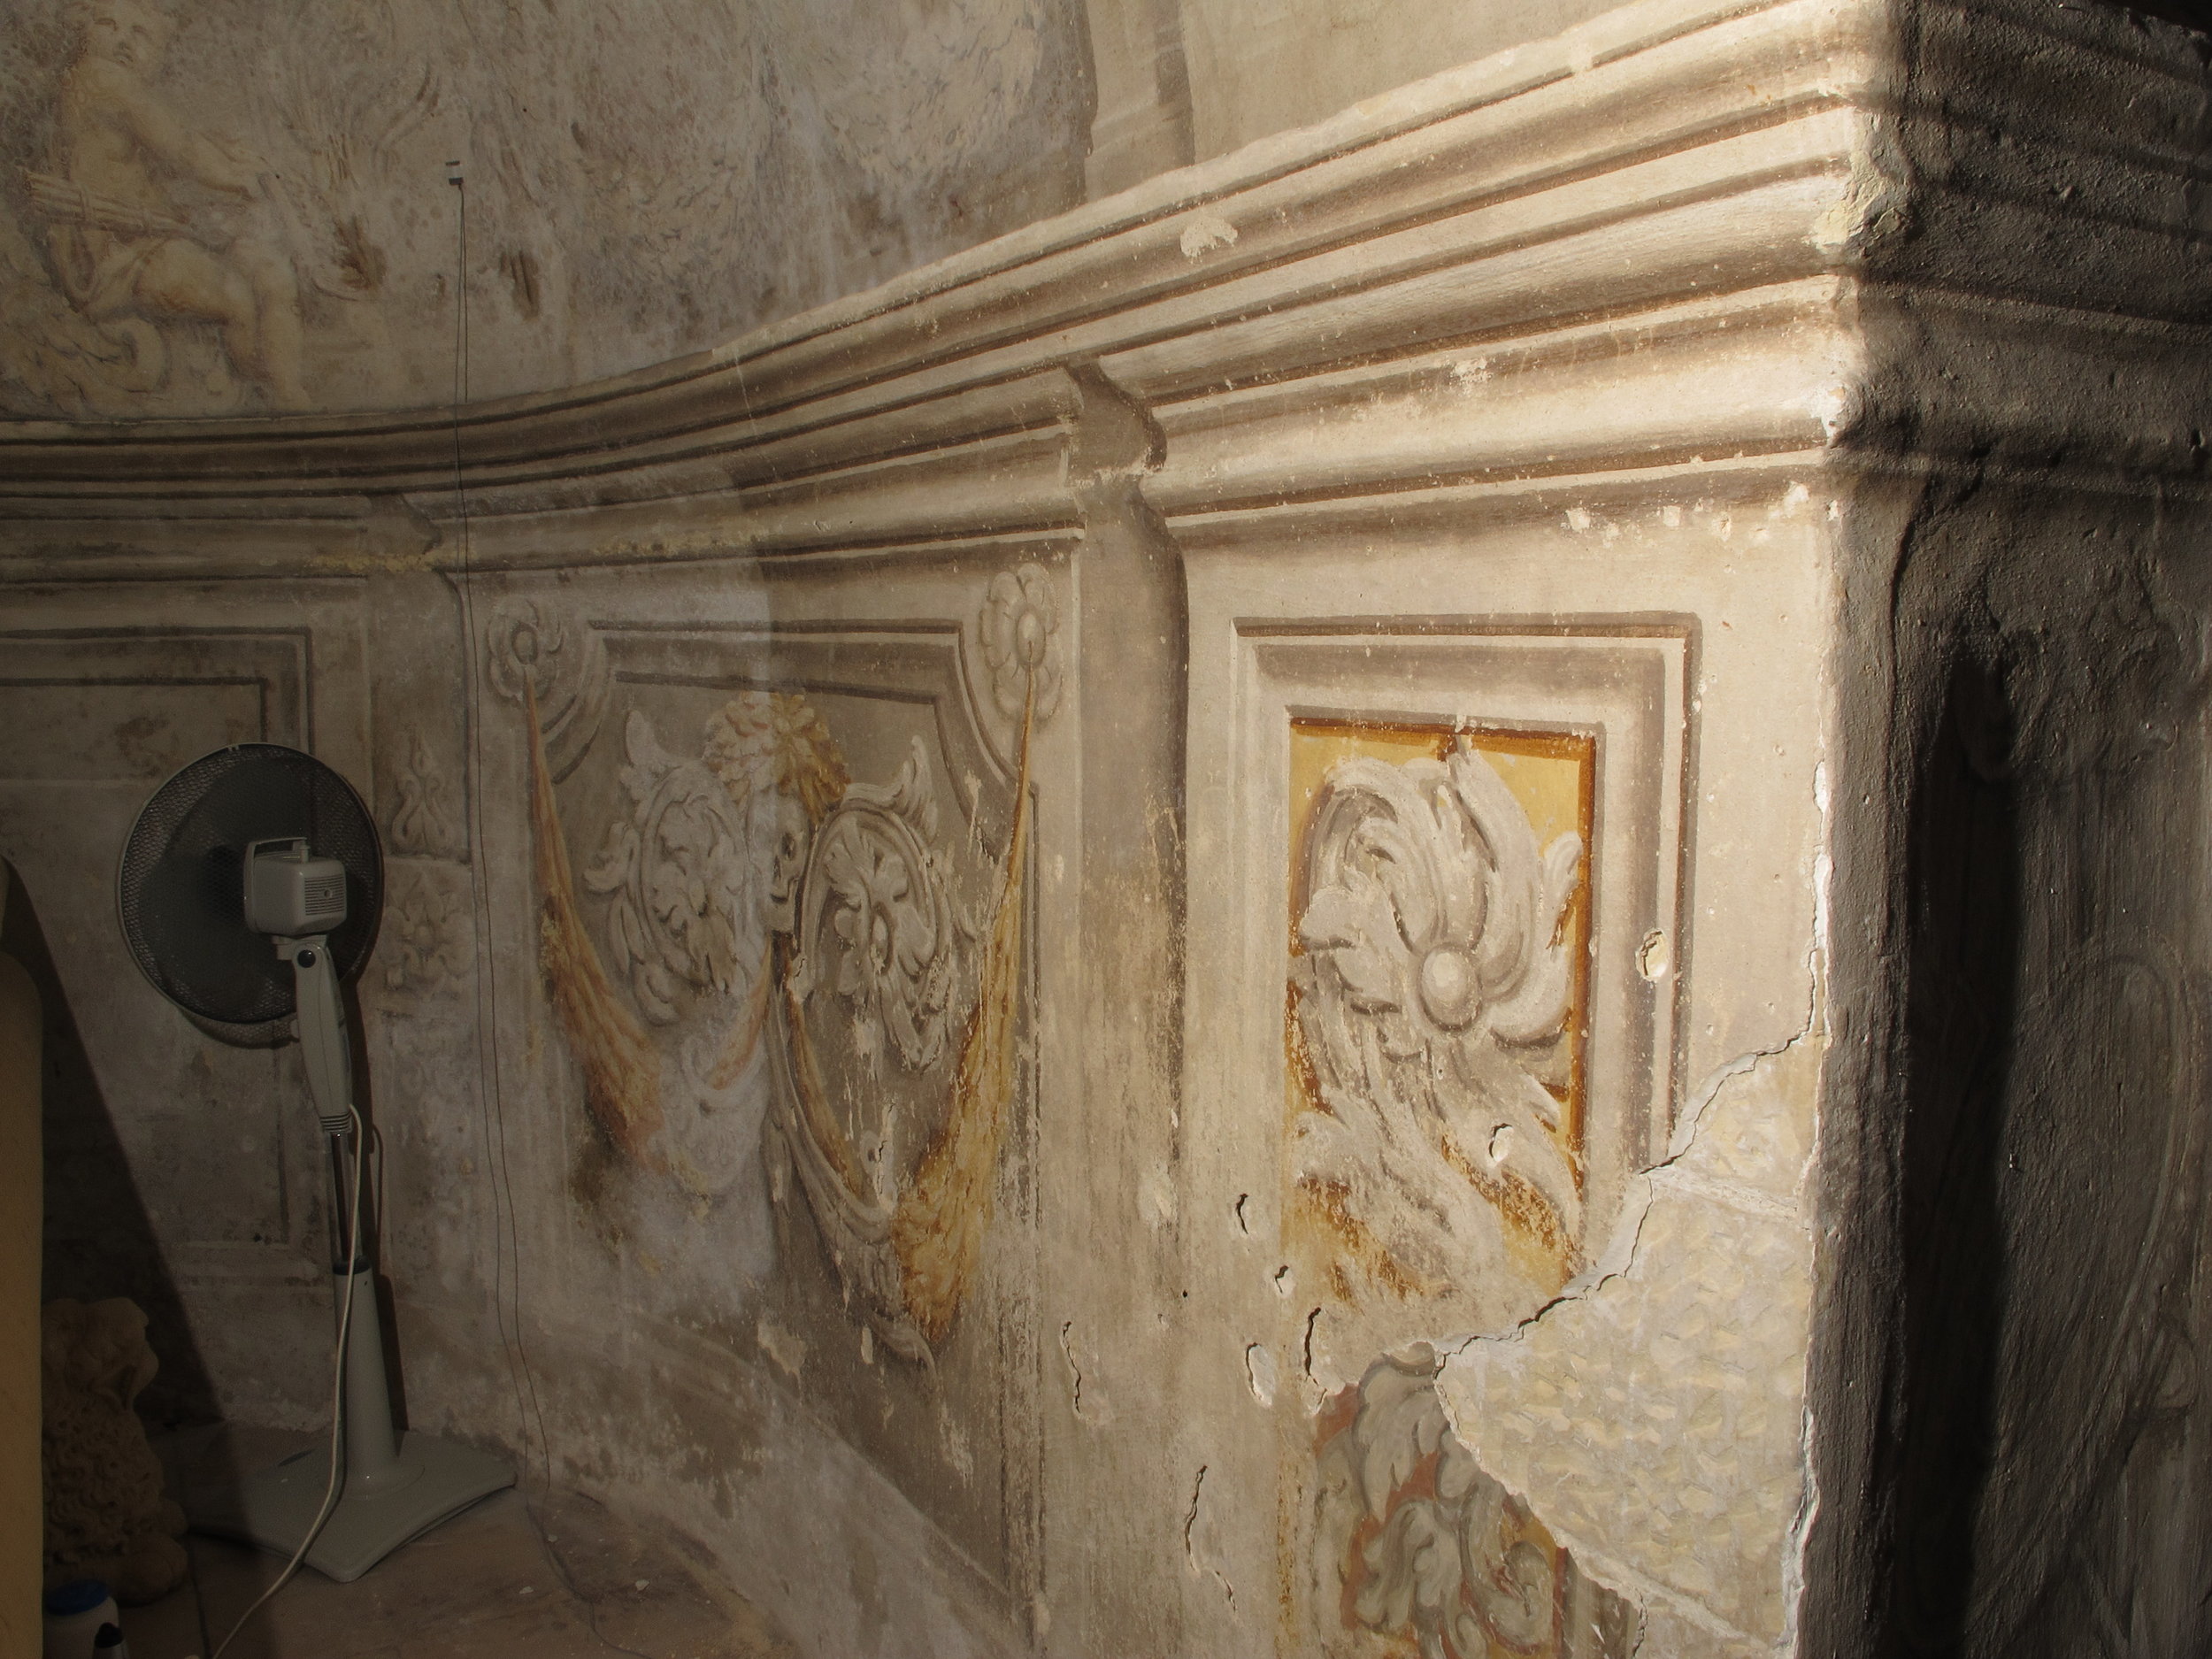  The wall paintings partially cleaned in the western apsidal area.&nbsp;  Image © Courtauld CWPD 